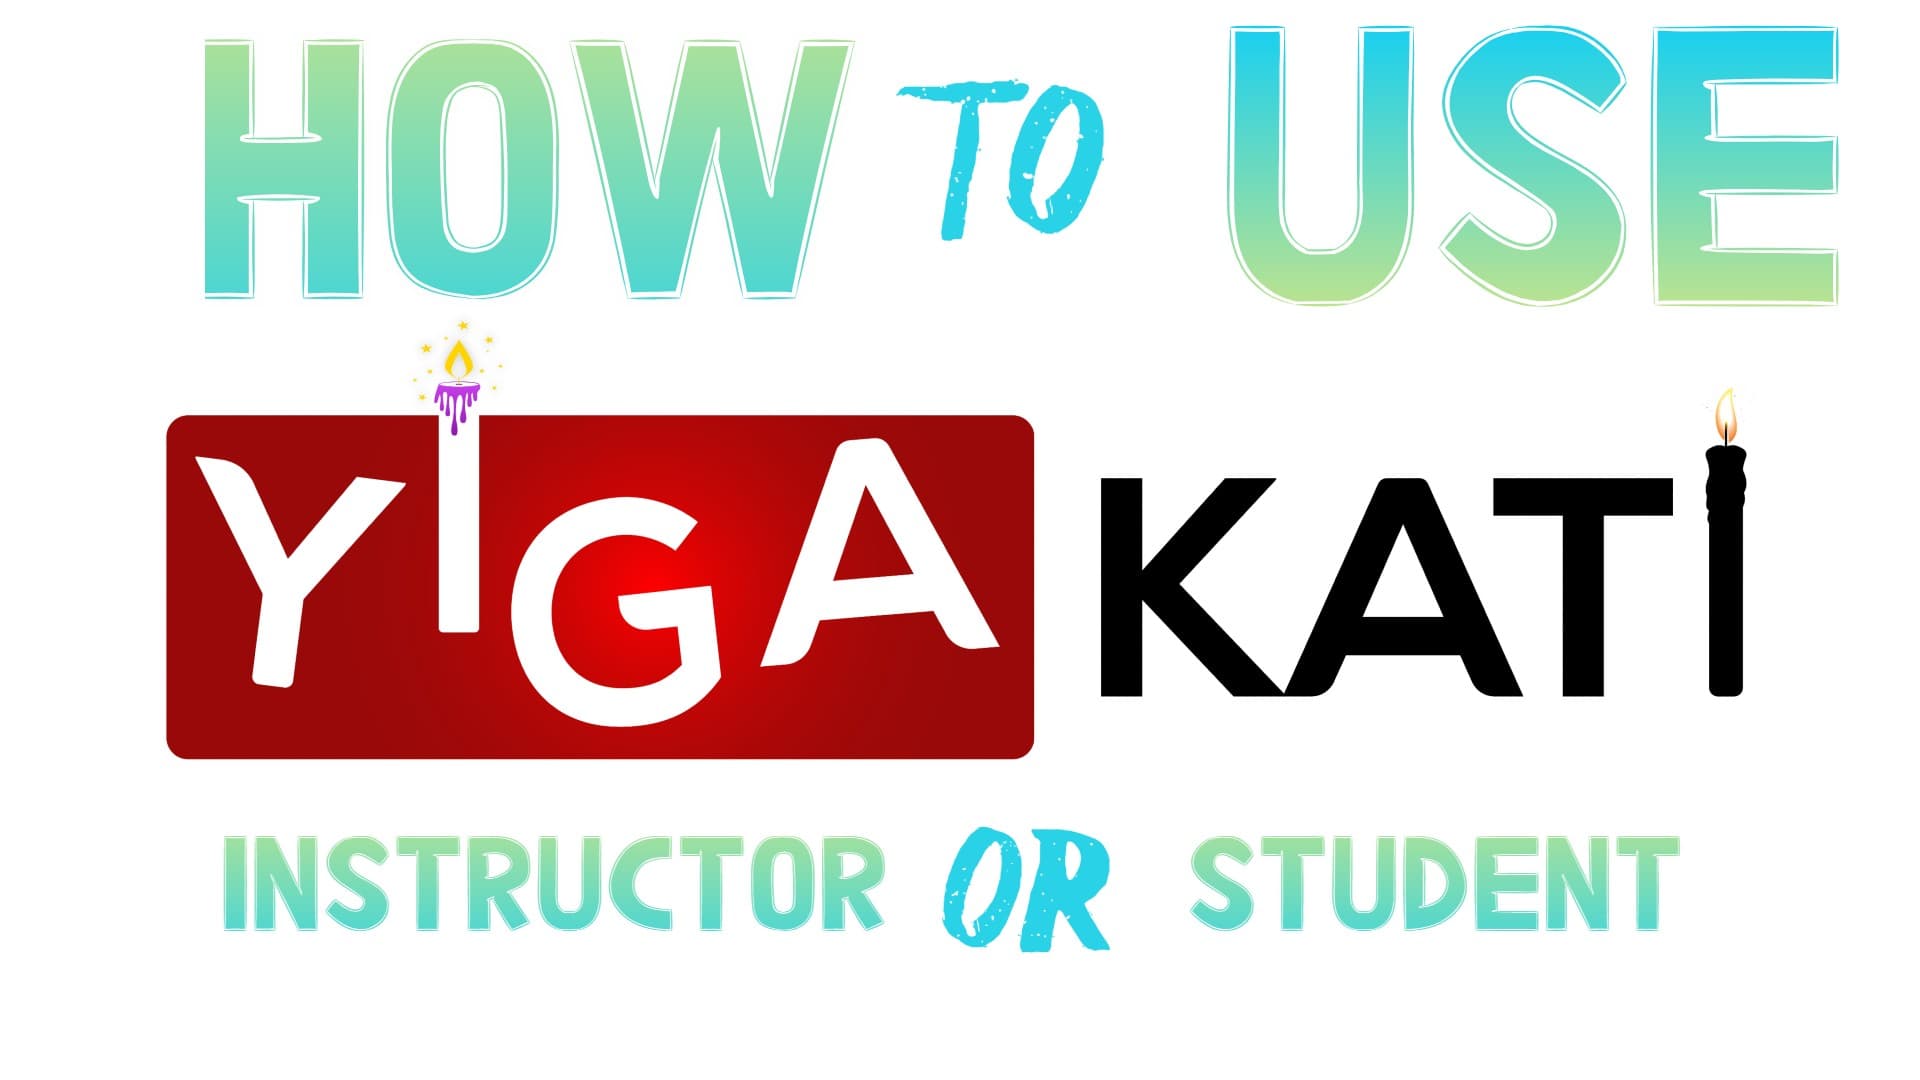 How to create a tutors Account, create and publish course on Yigakati.